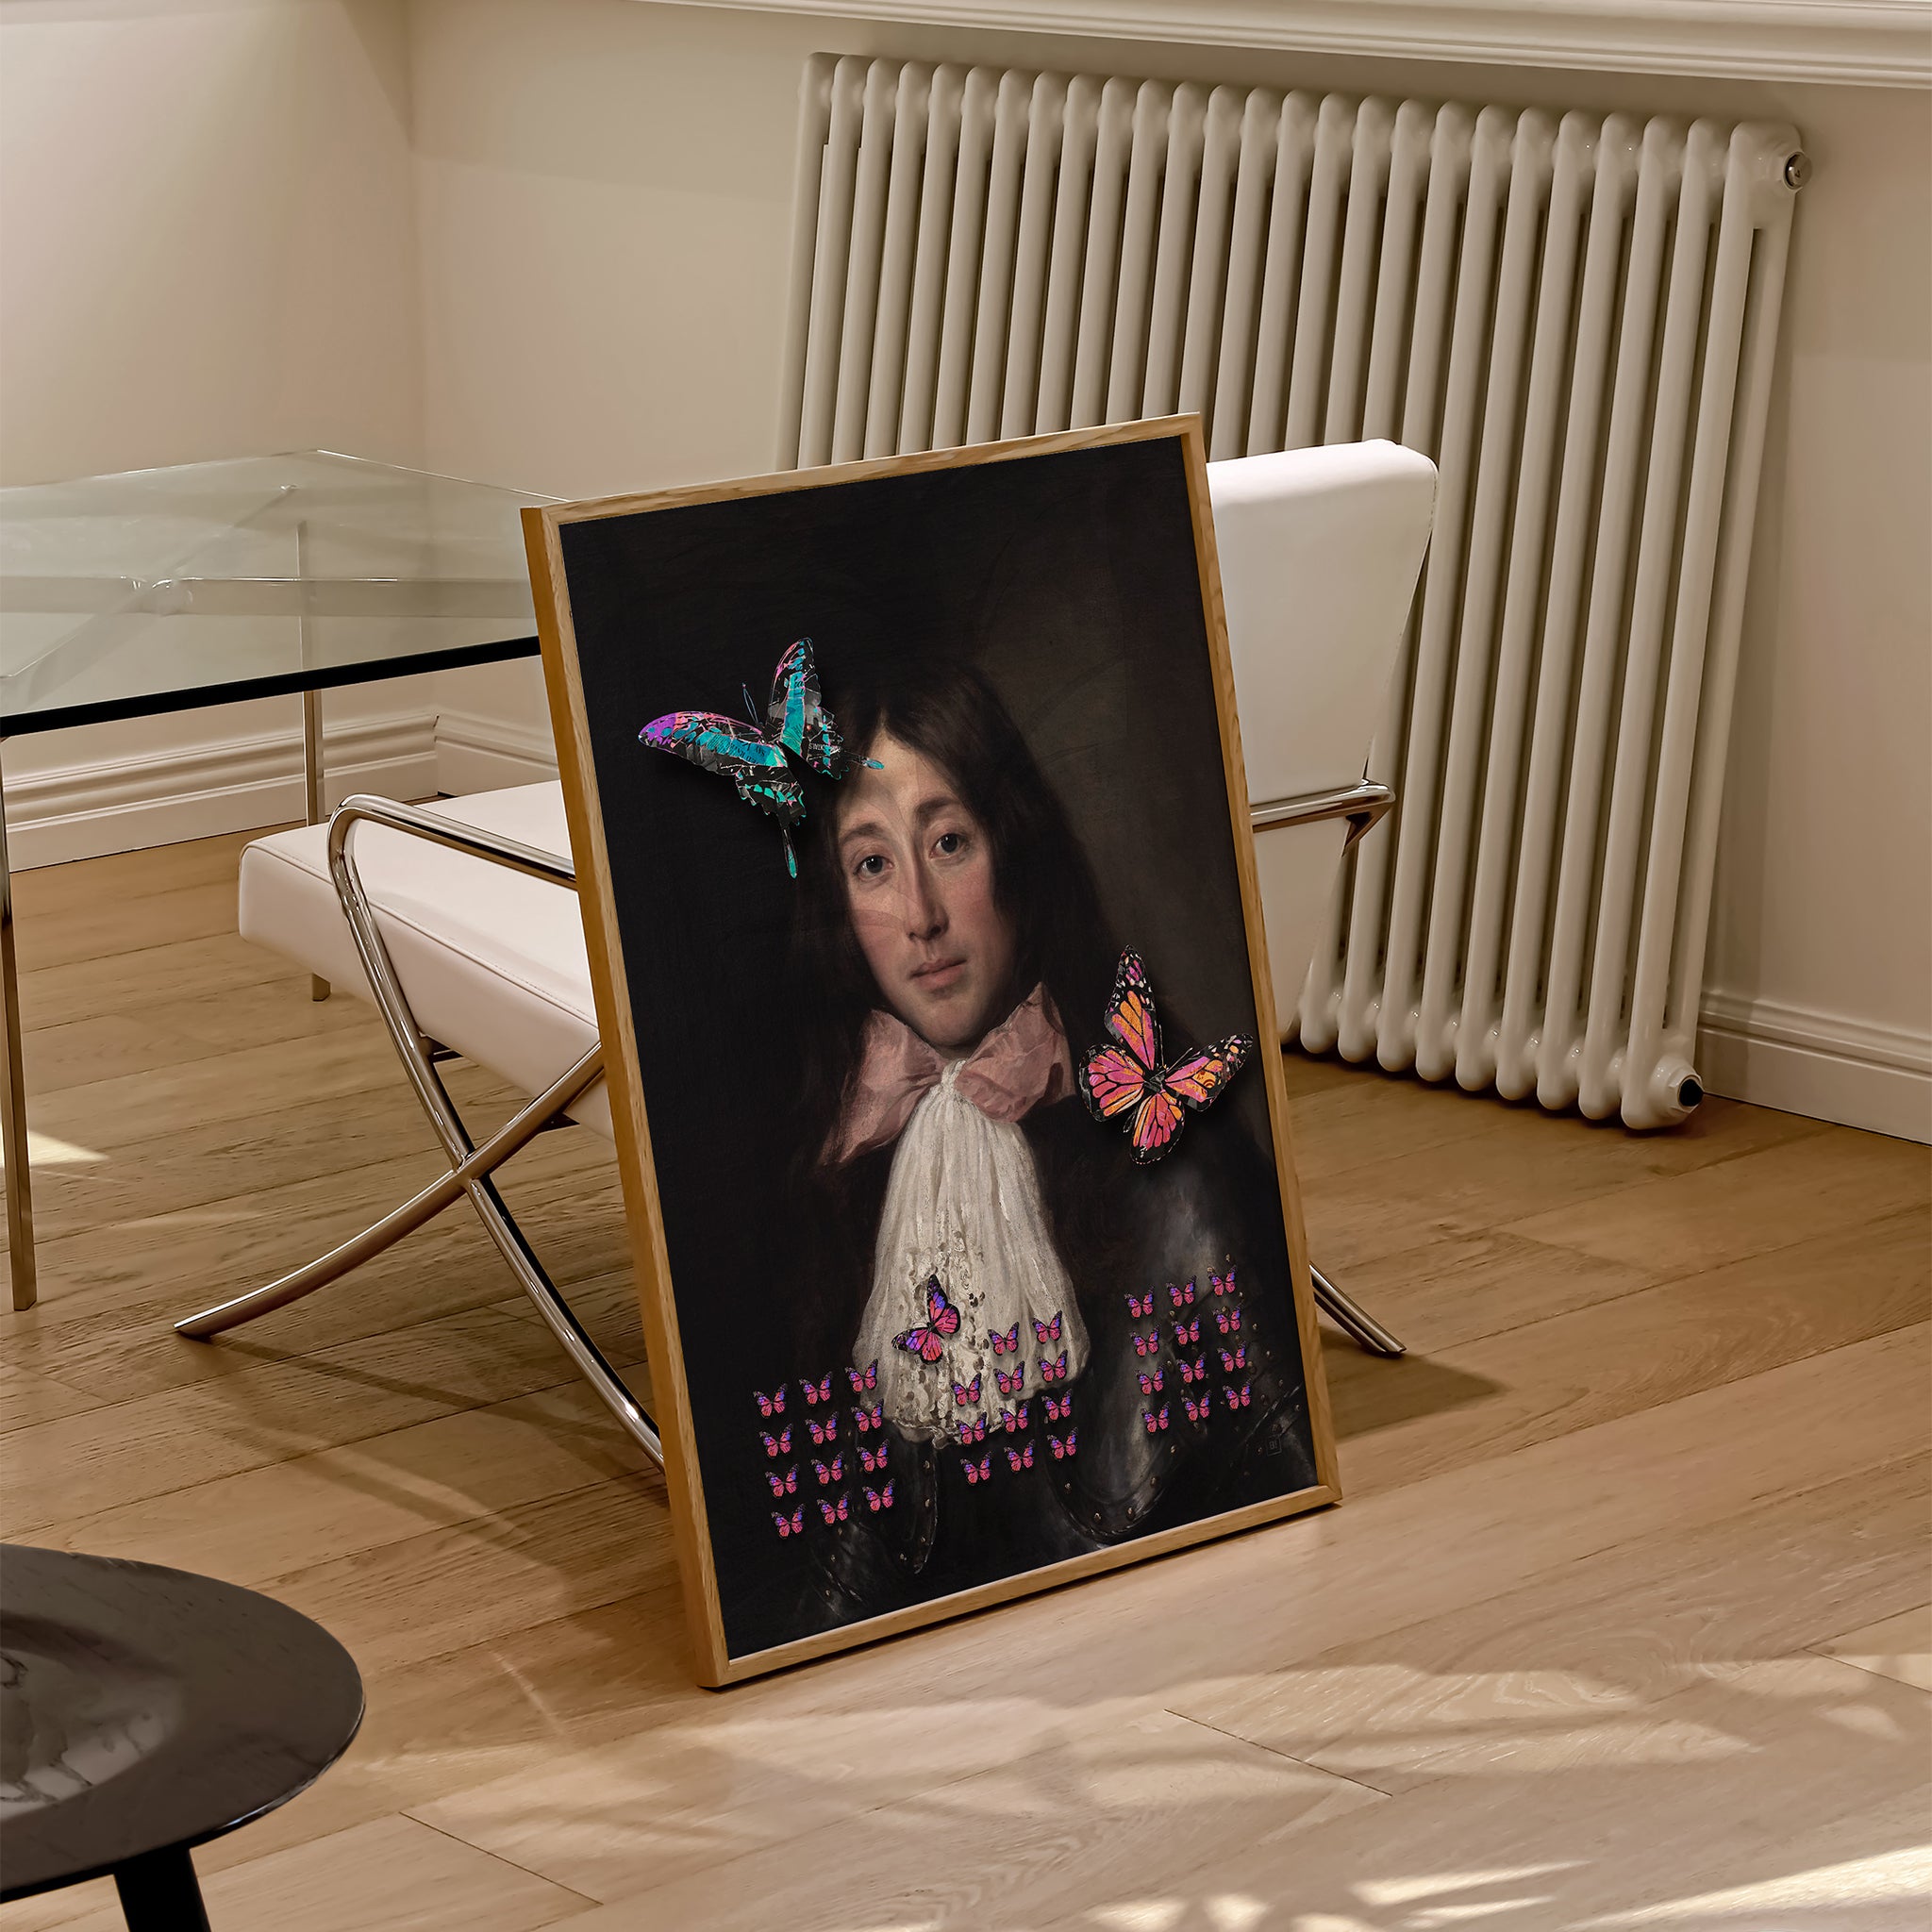 Be inspired by our altered soldier with pink tie and butterflies art print. This artwork was printed using the giclée process on archival acid-free paper and is presented in a natural oak frame that captures its timeless beauty in every detail.